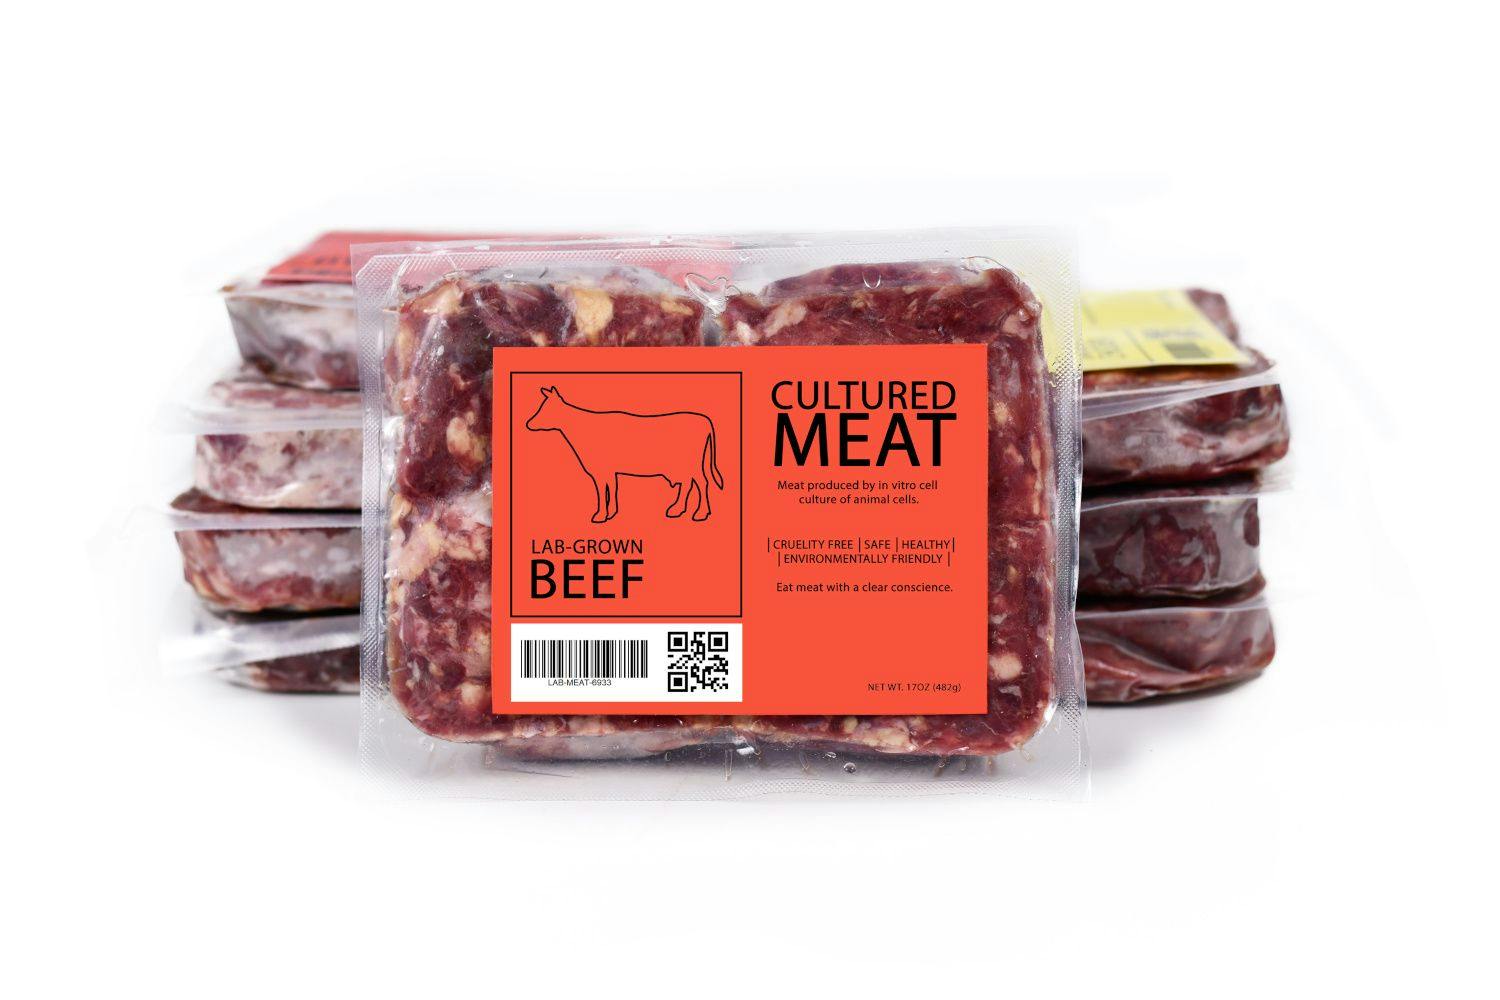 Recent survey finds high level of openness to cultivated meat